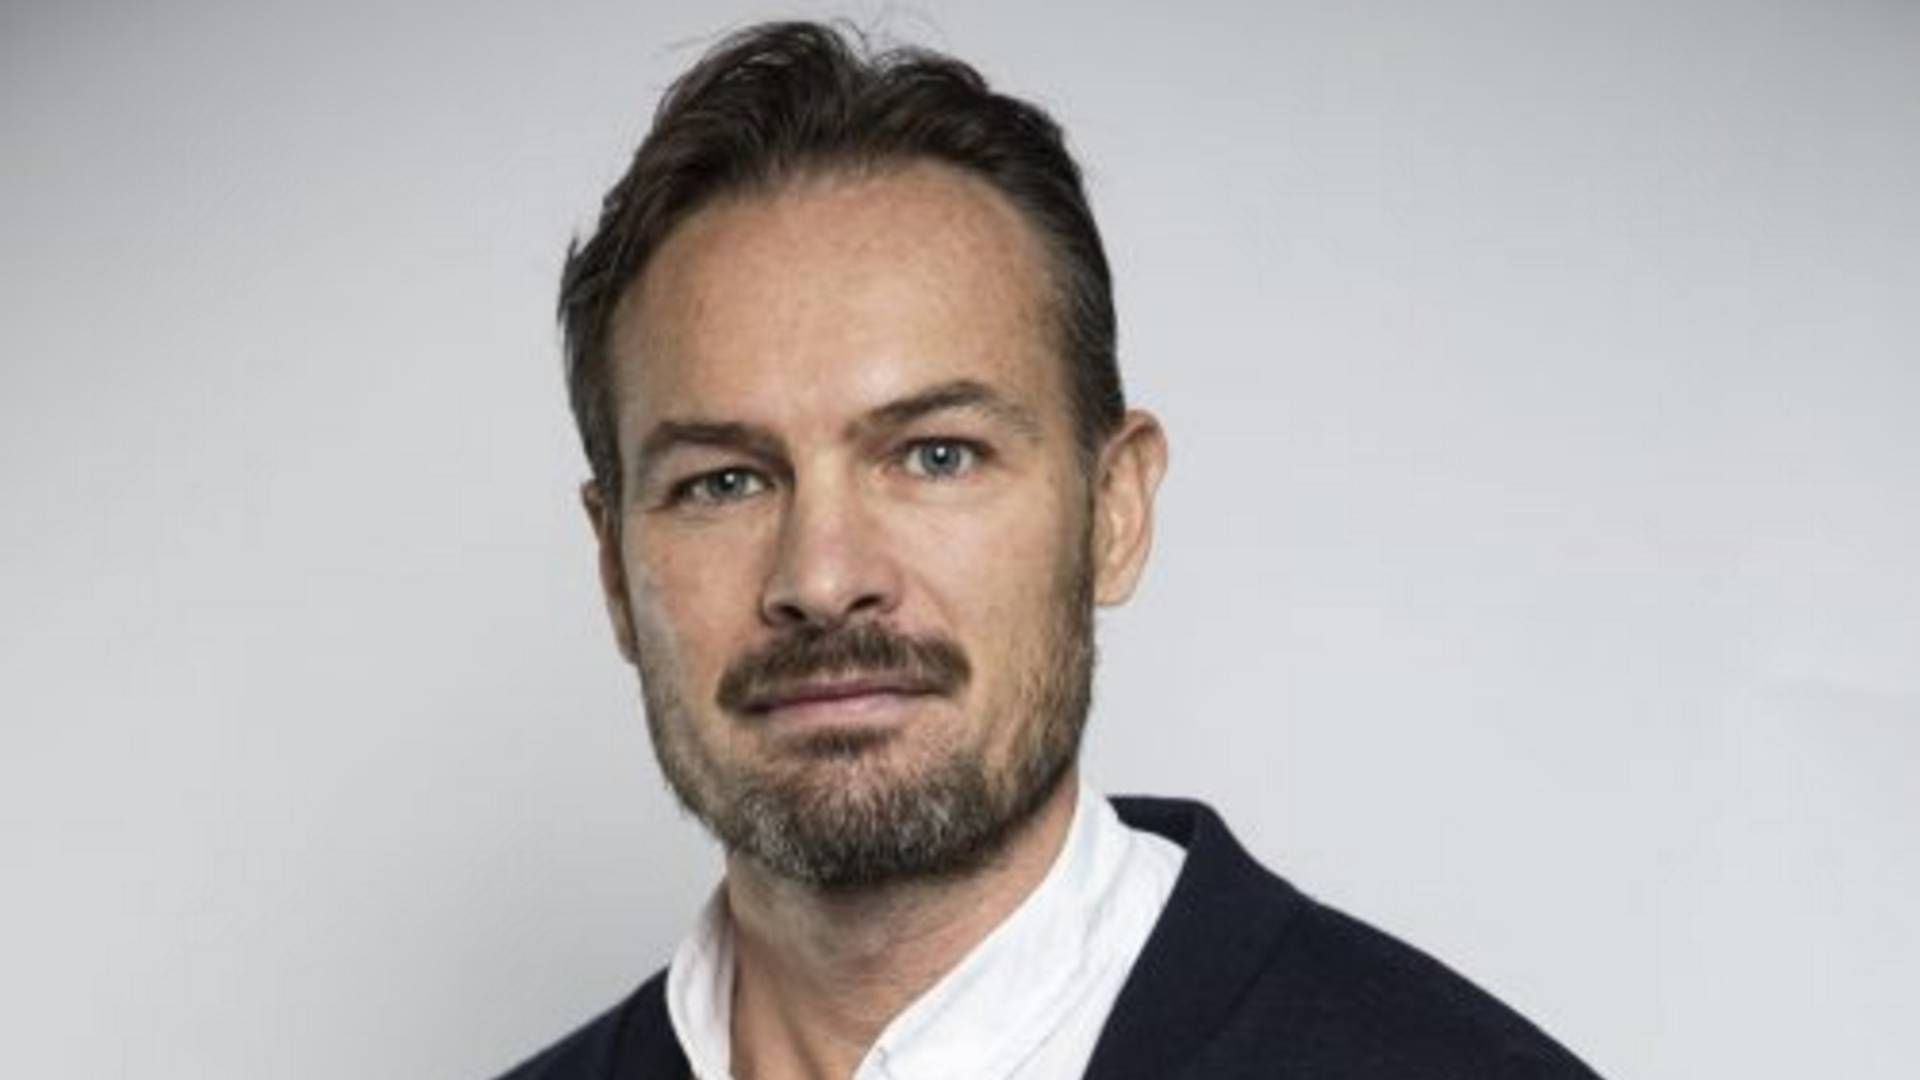 Fredrik Tauson, who manages a fund with a credit opportunity mandate at Stockholm-based Nordic Cross. | Photo: https://nordiccross.com/om-oss/organisation/